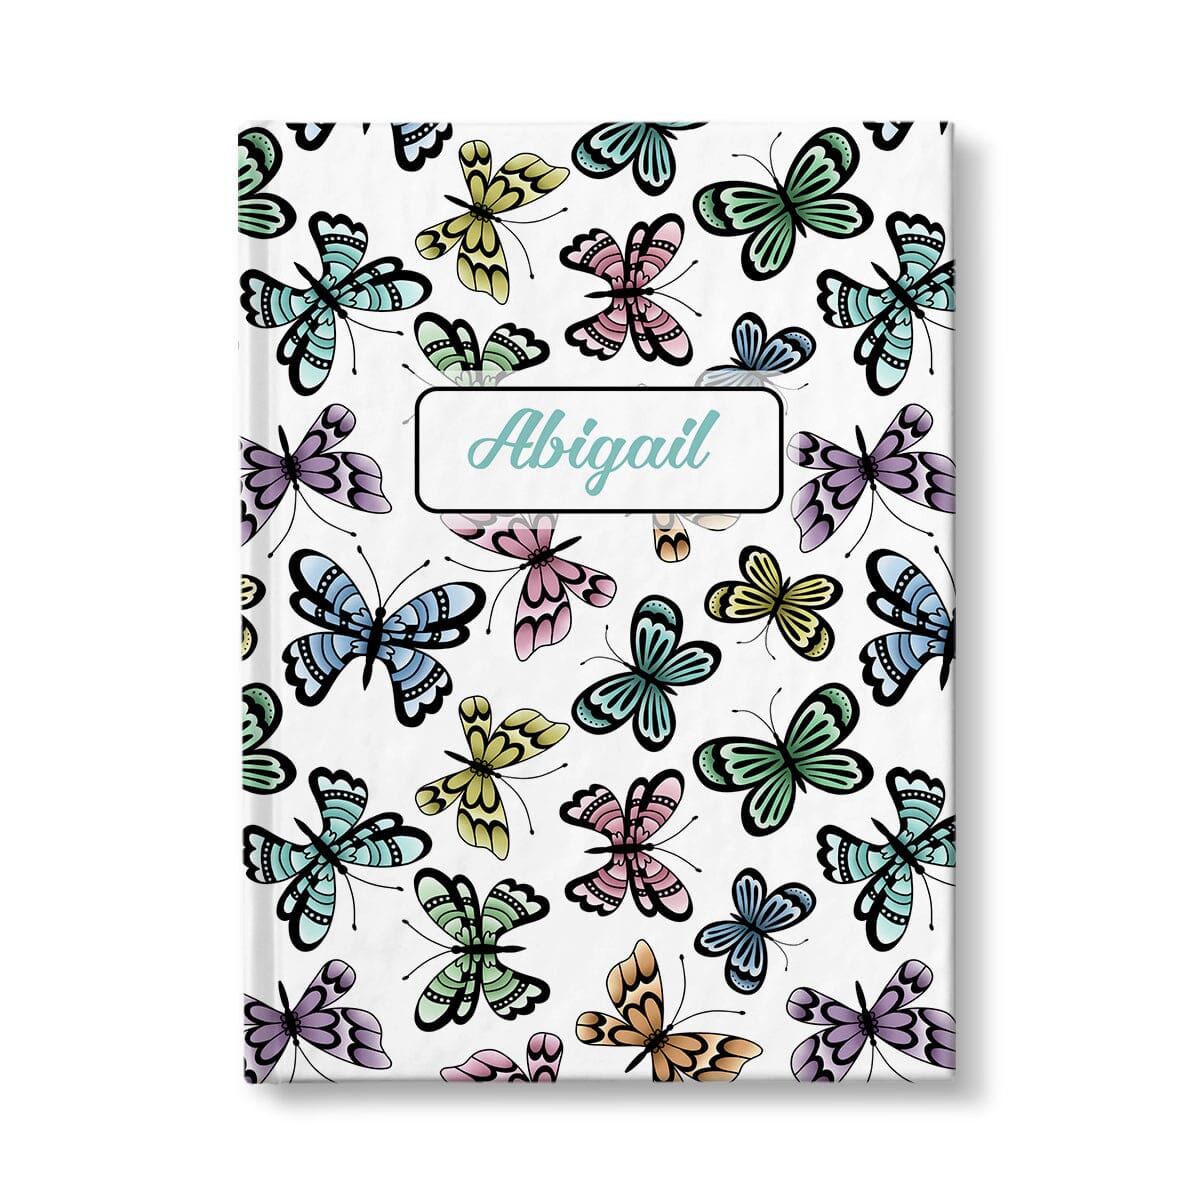 Personalized Pretty Butterflies Pattern Journal at Artistically Invited.